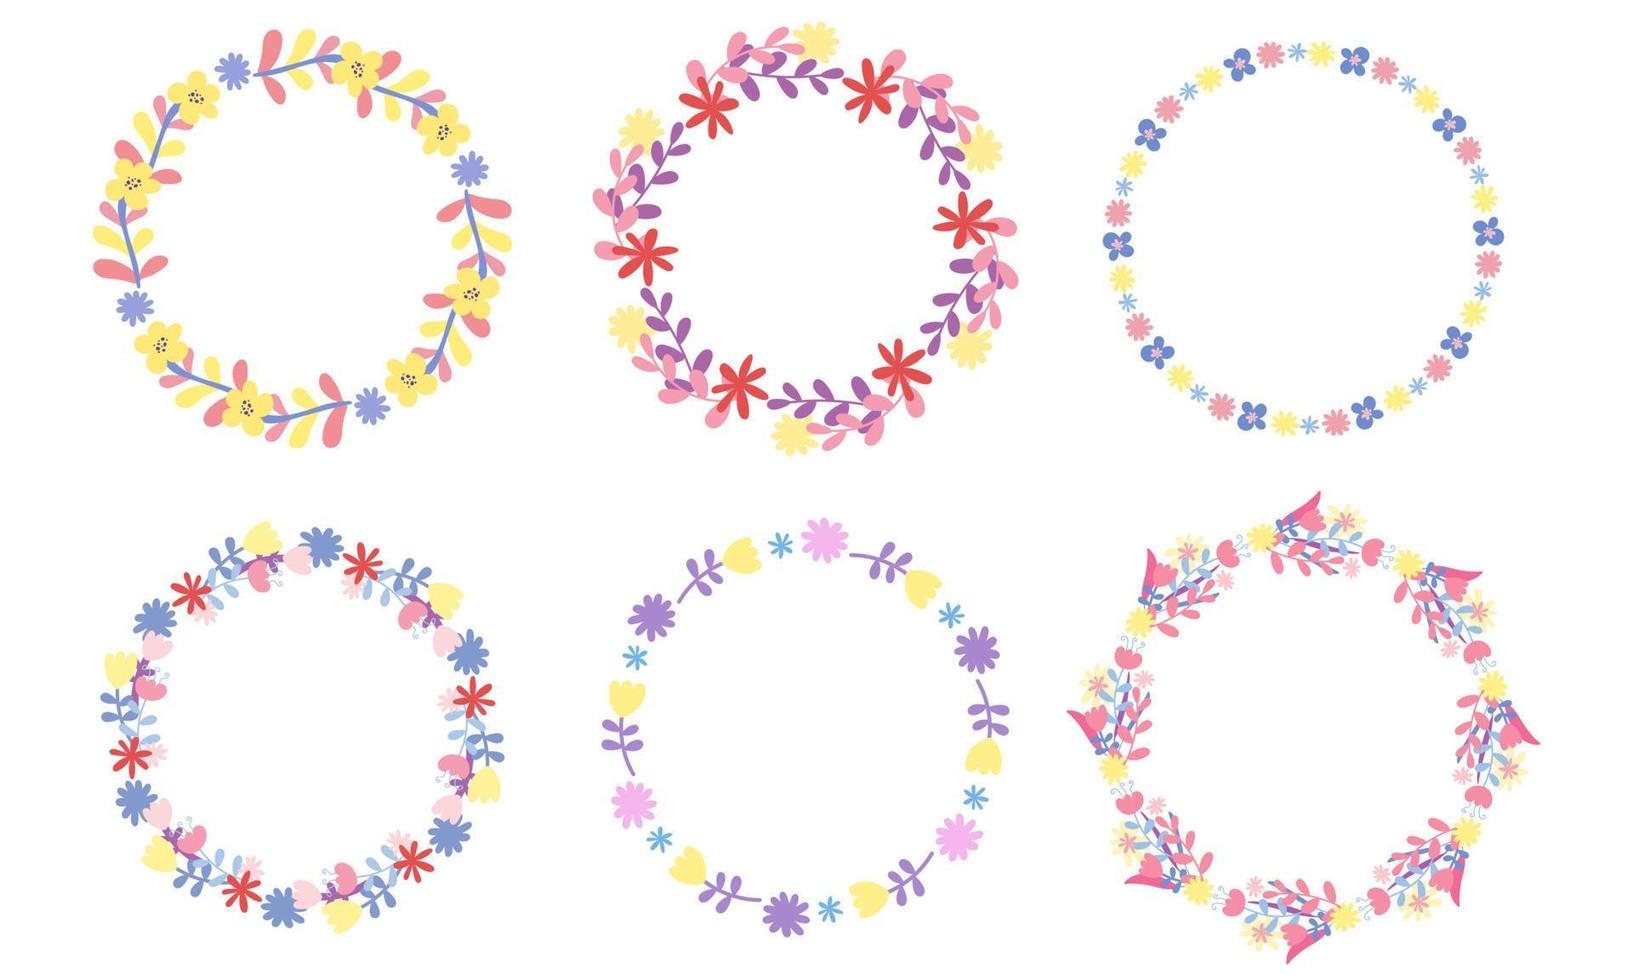 Doodle flower wreaths vector collection.